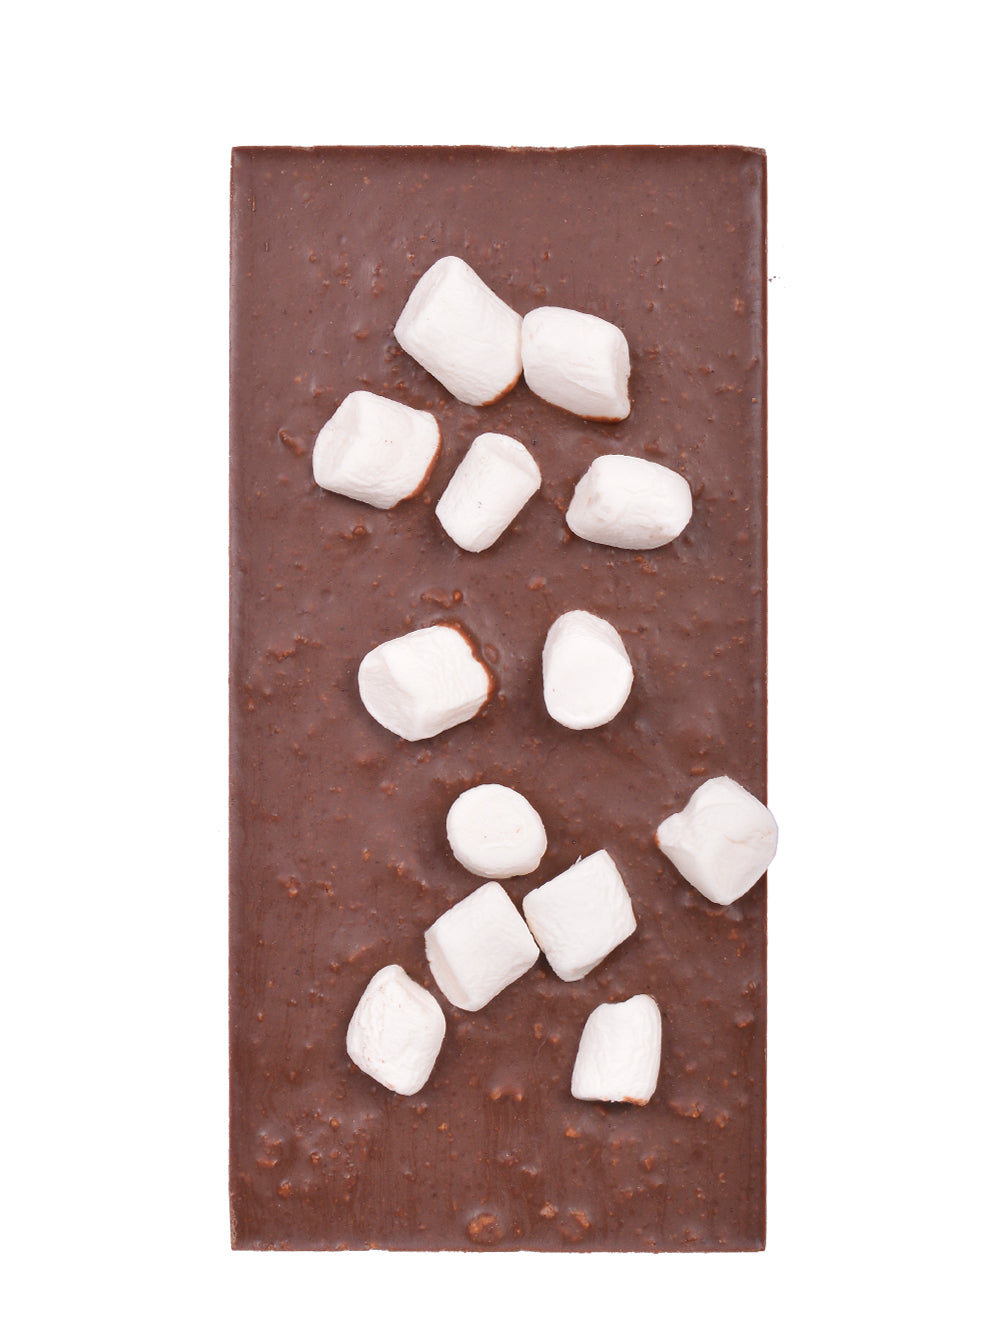 Oh My S'mores! Chocolate Bar Unpackaged